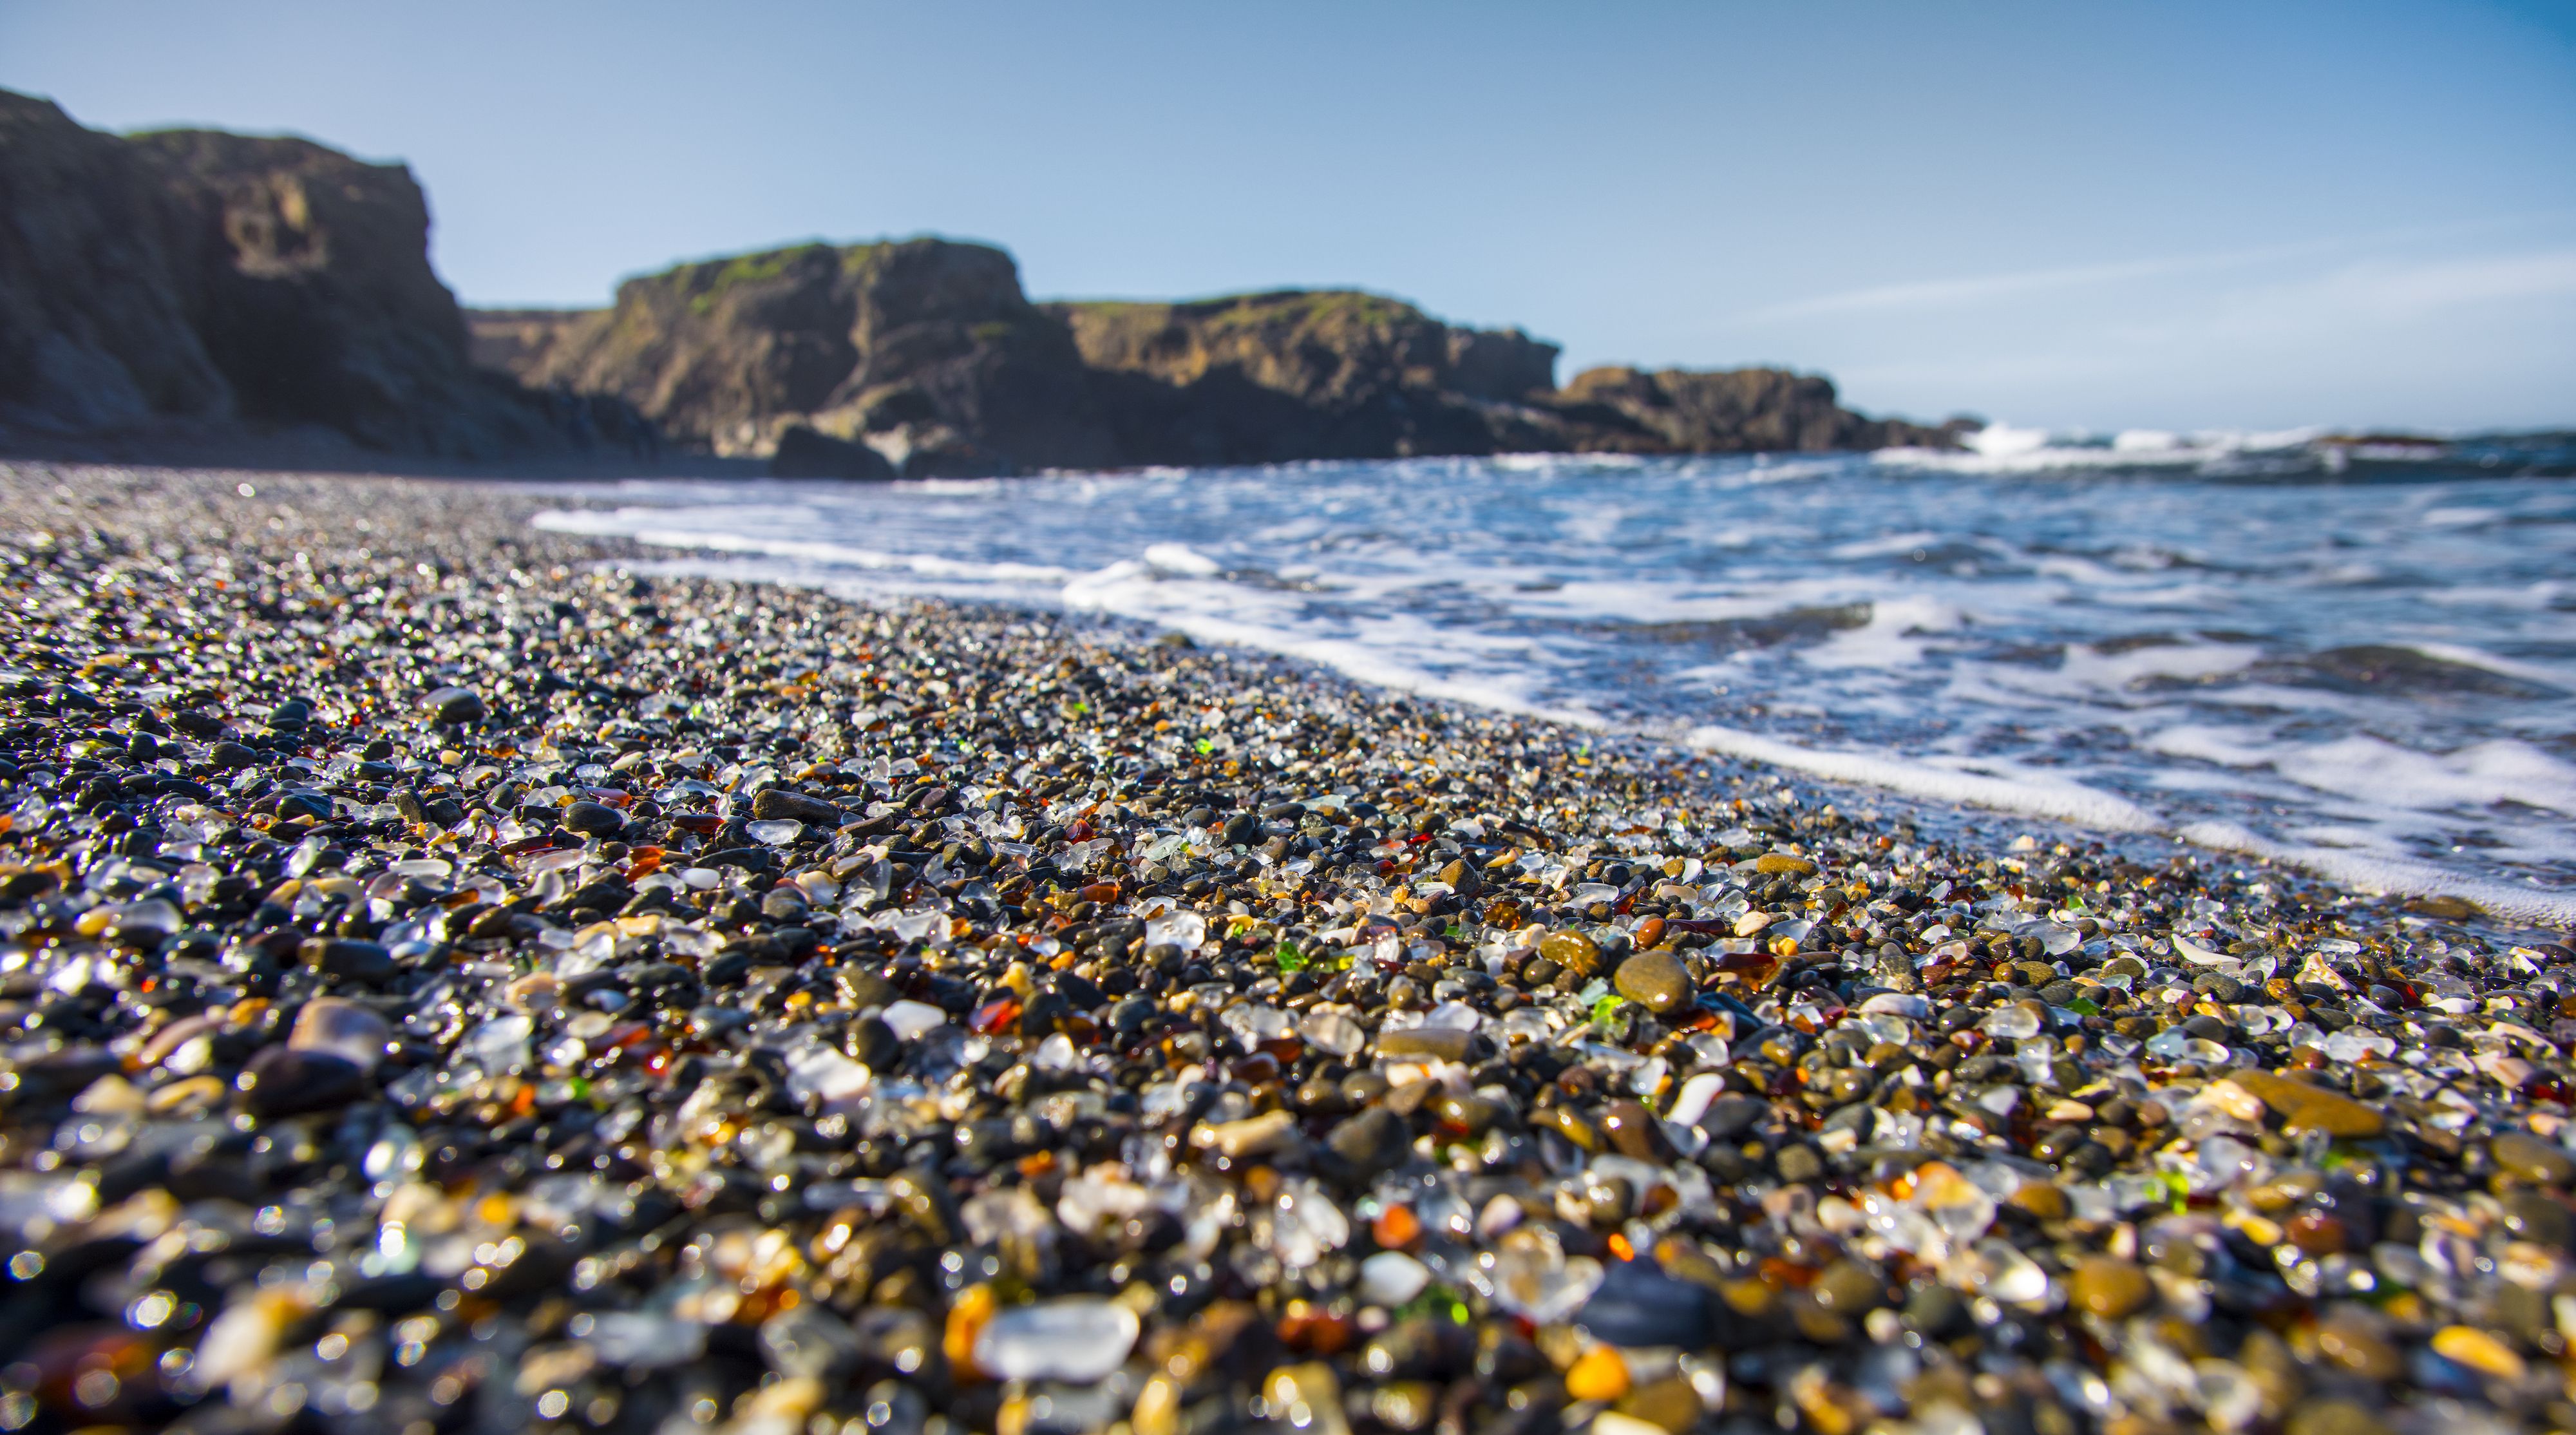 Discovered! A New Sea Glass Beach! Read About Russia's Glass Beach Here.